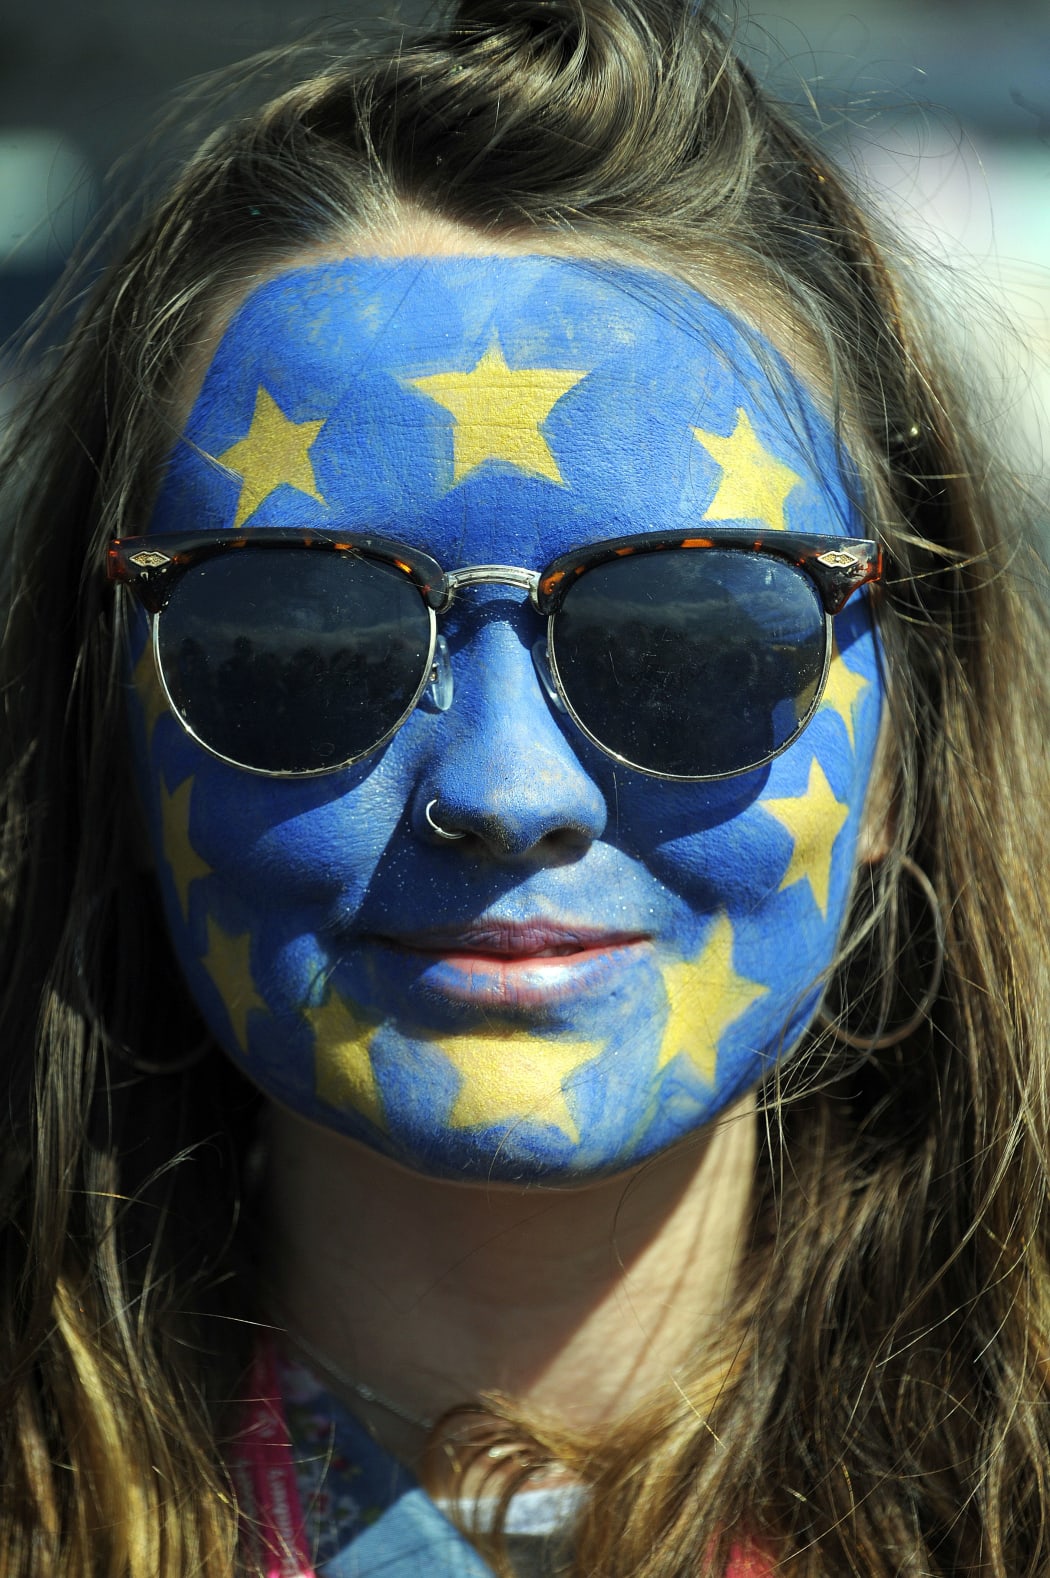 A festival-goer with a European flag painted on her face poses for a photograph on day three of the Glastonbury Festival.